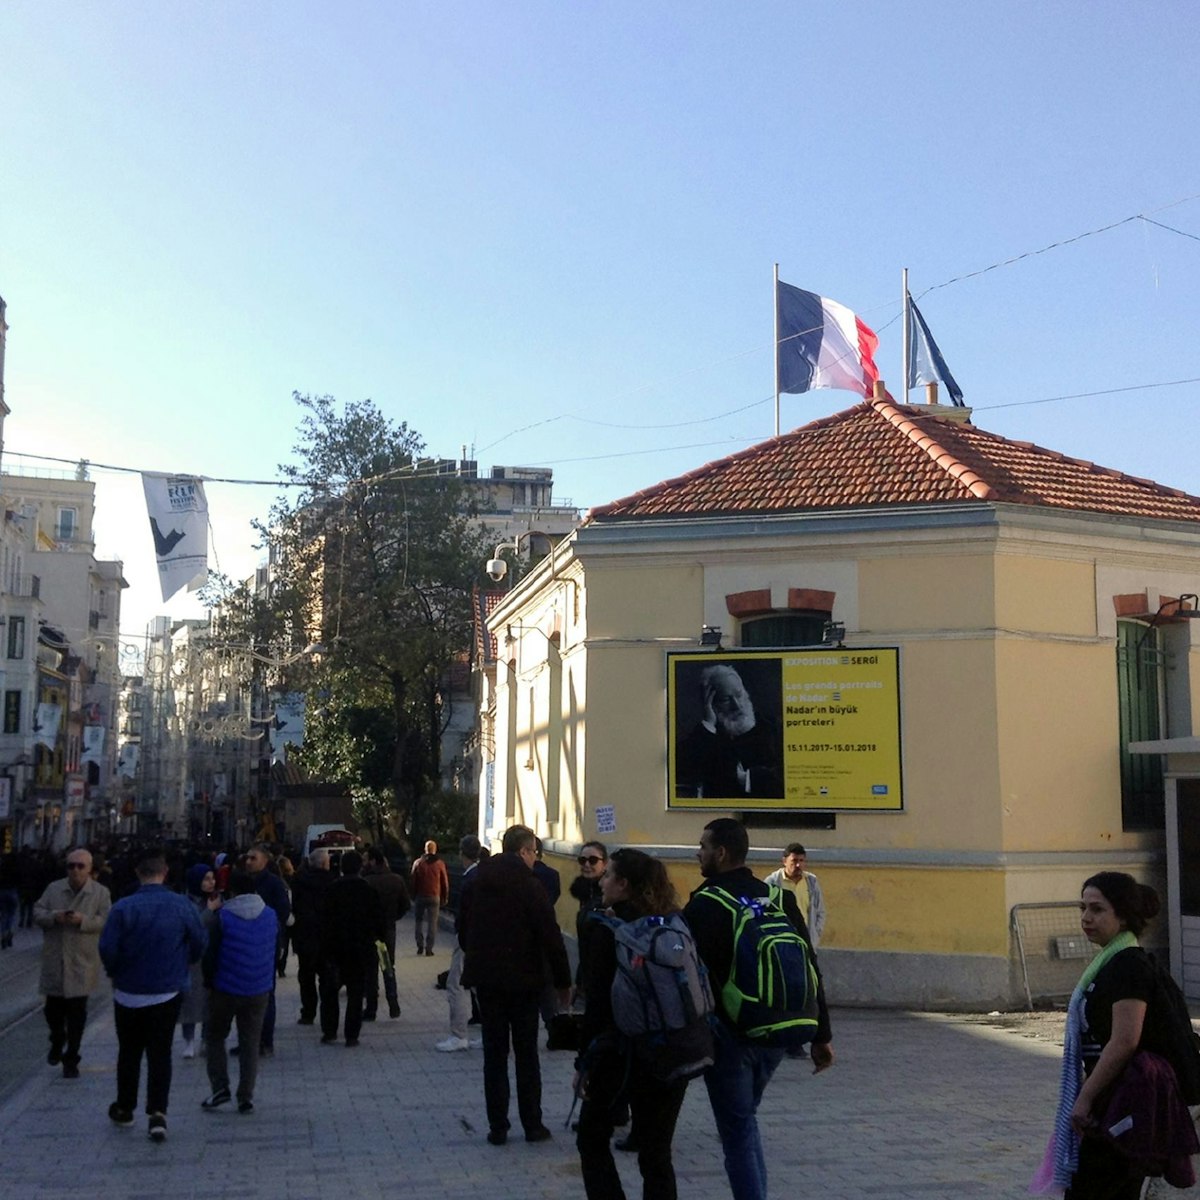 French Cultural Centre on İstiklal Caddesi